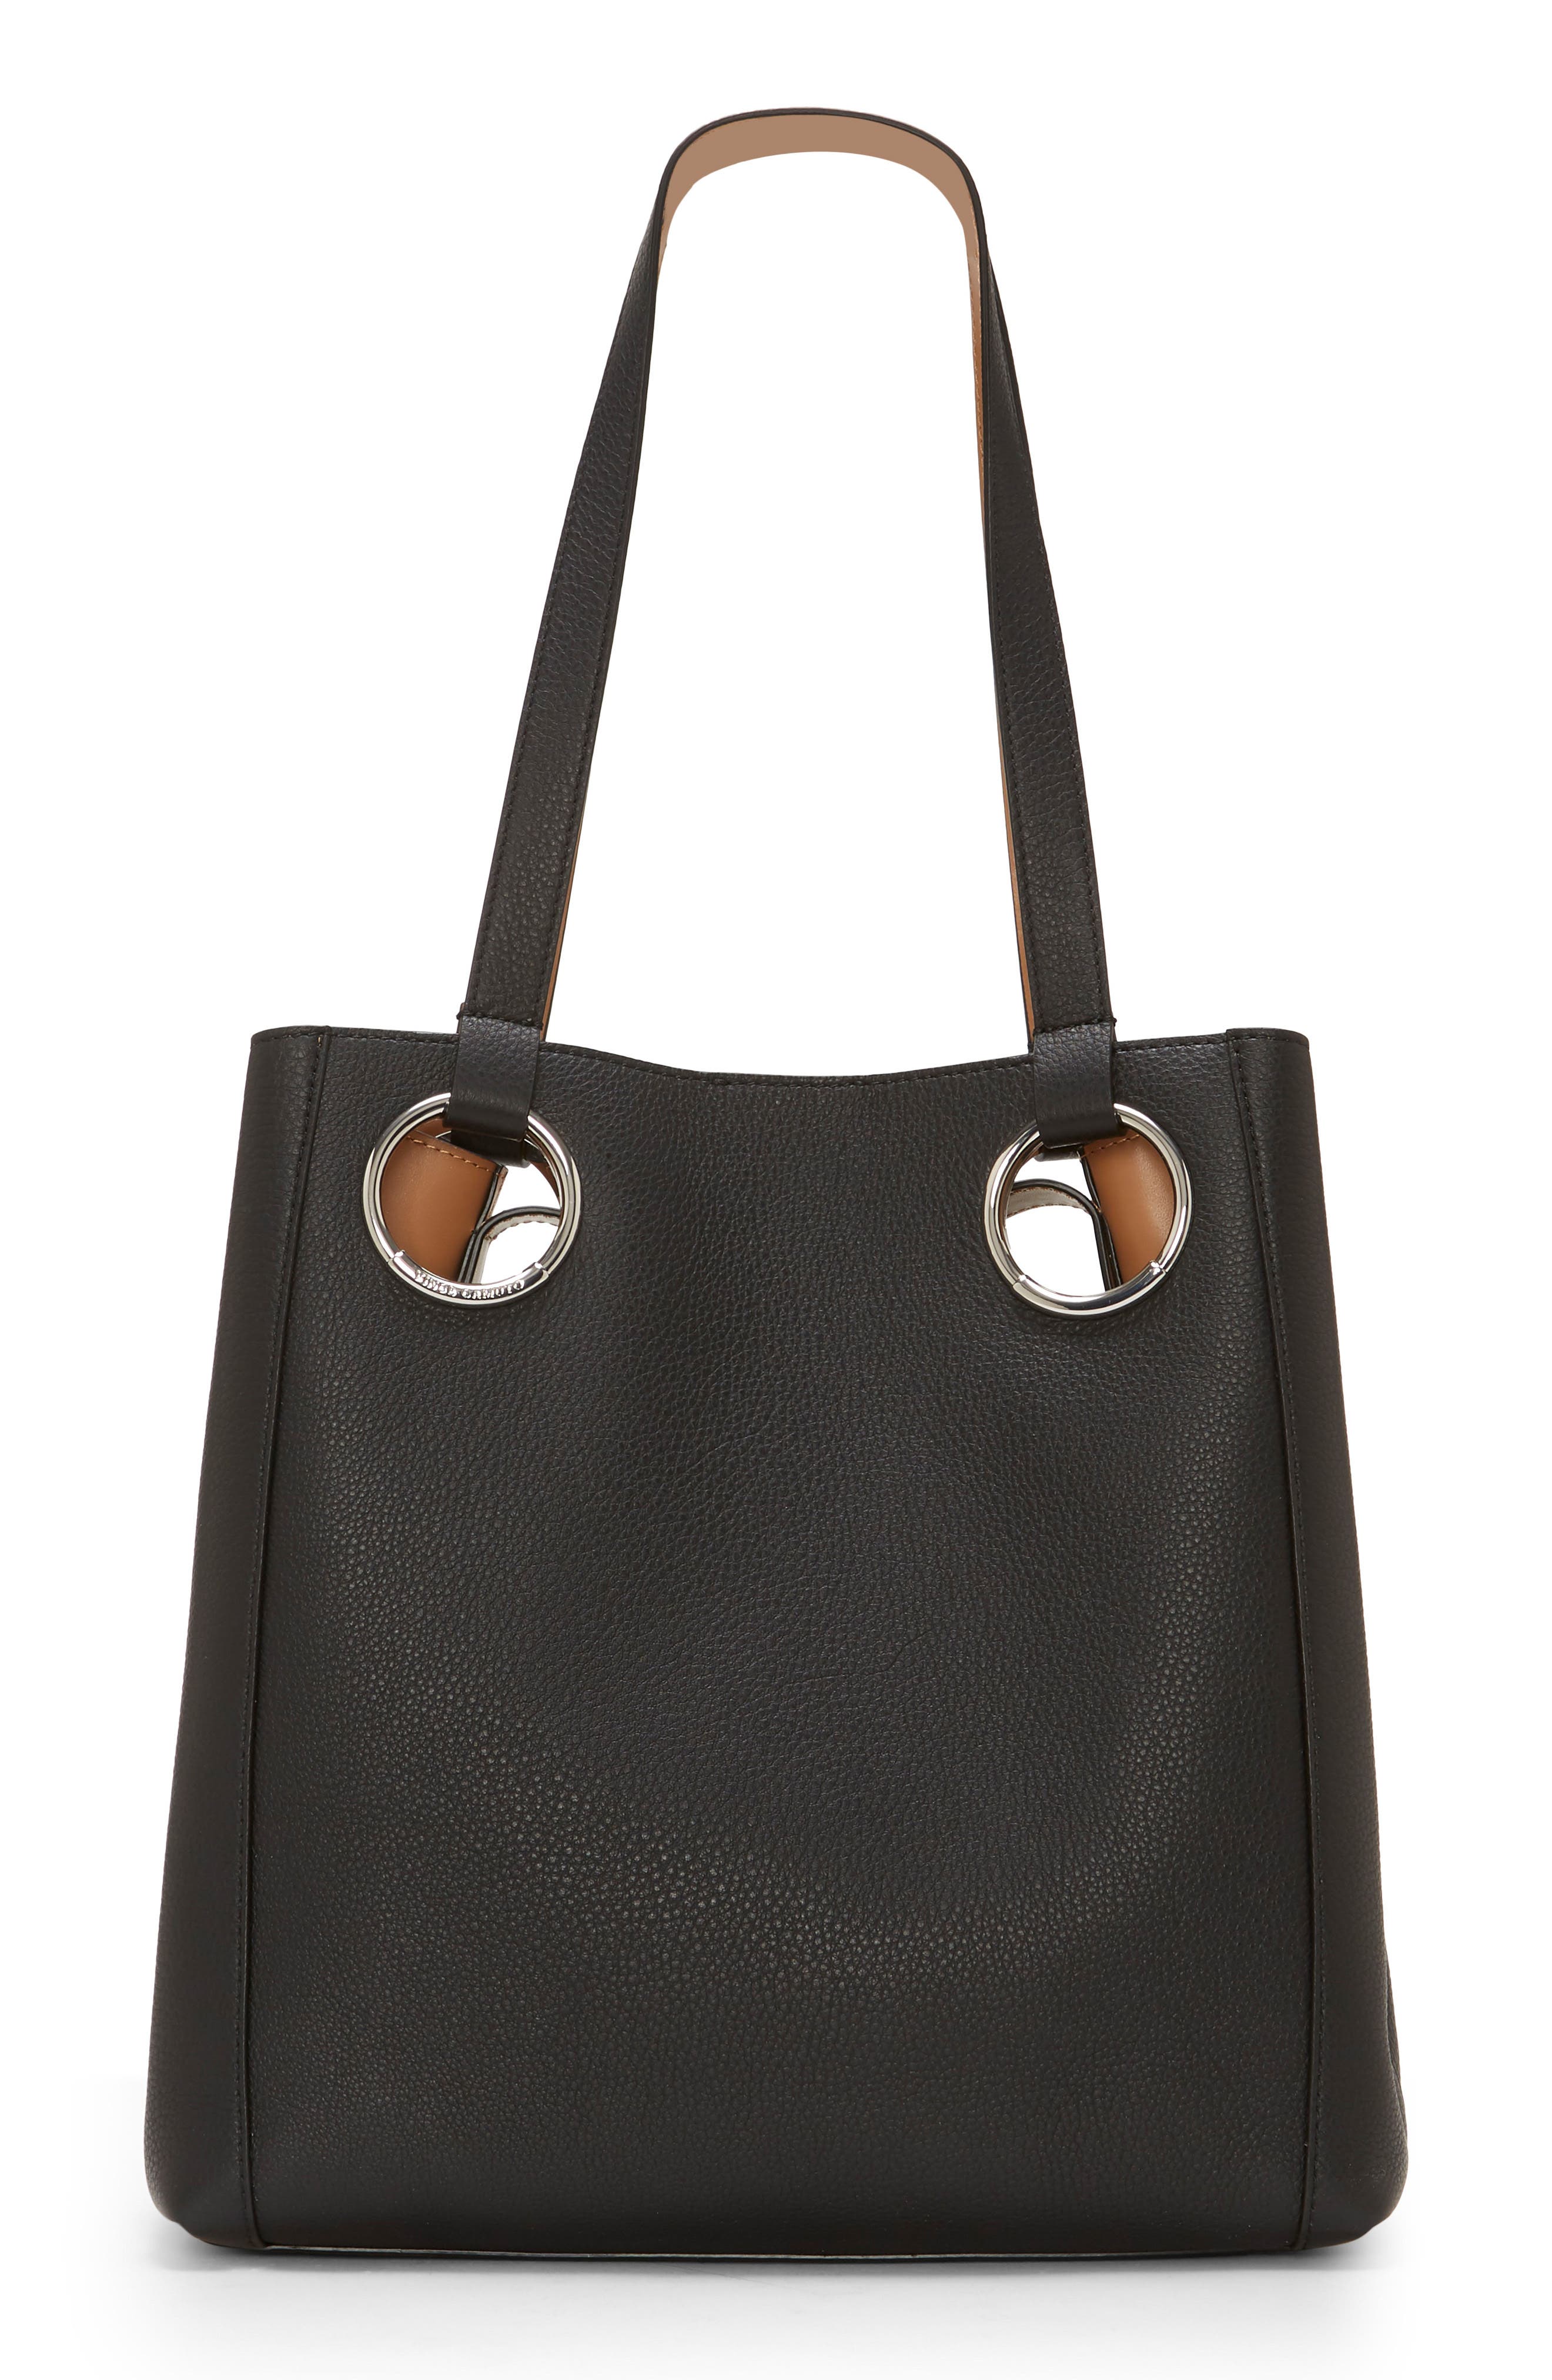 Vince Camuto Women's Bags